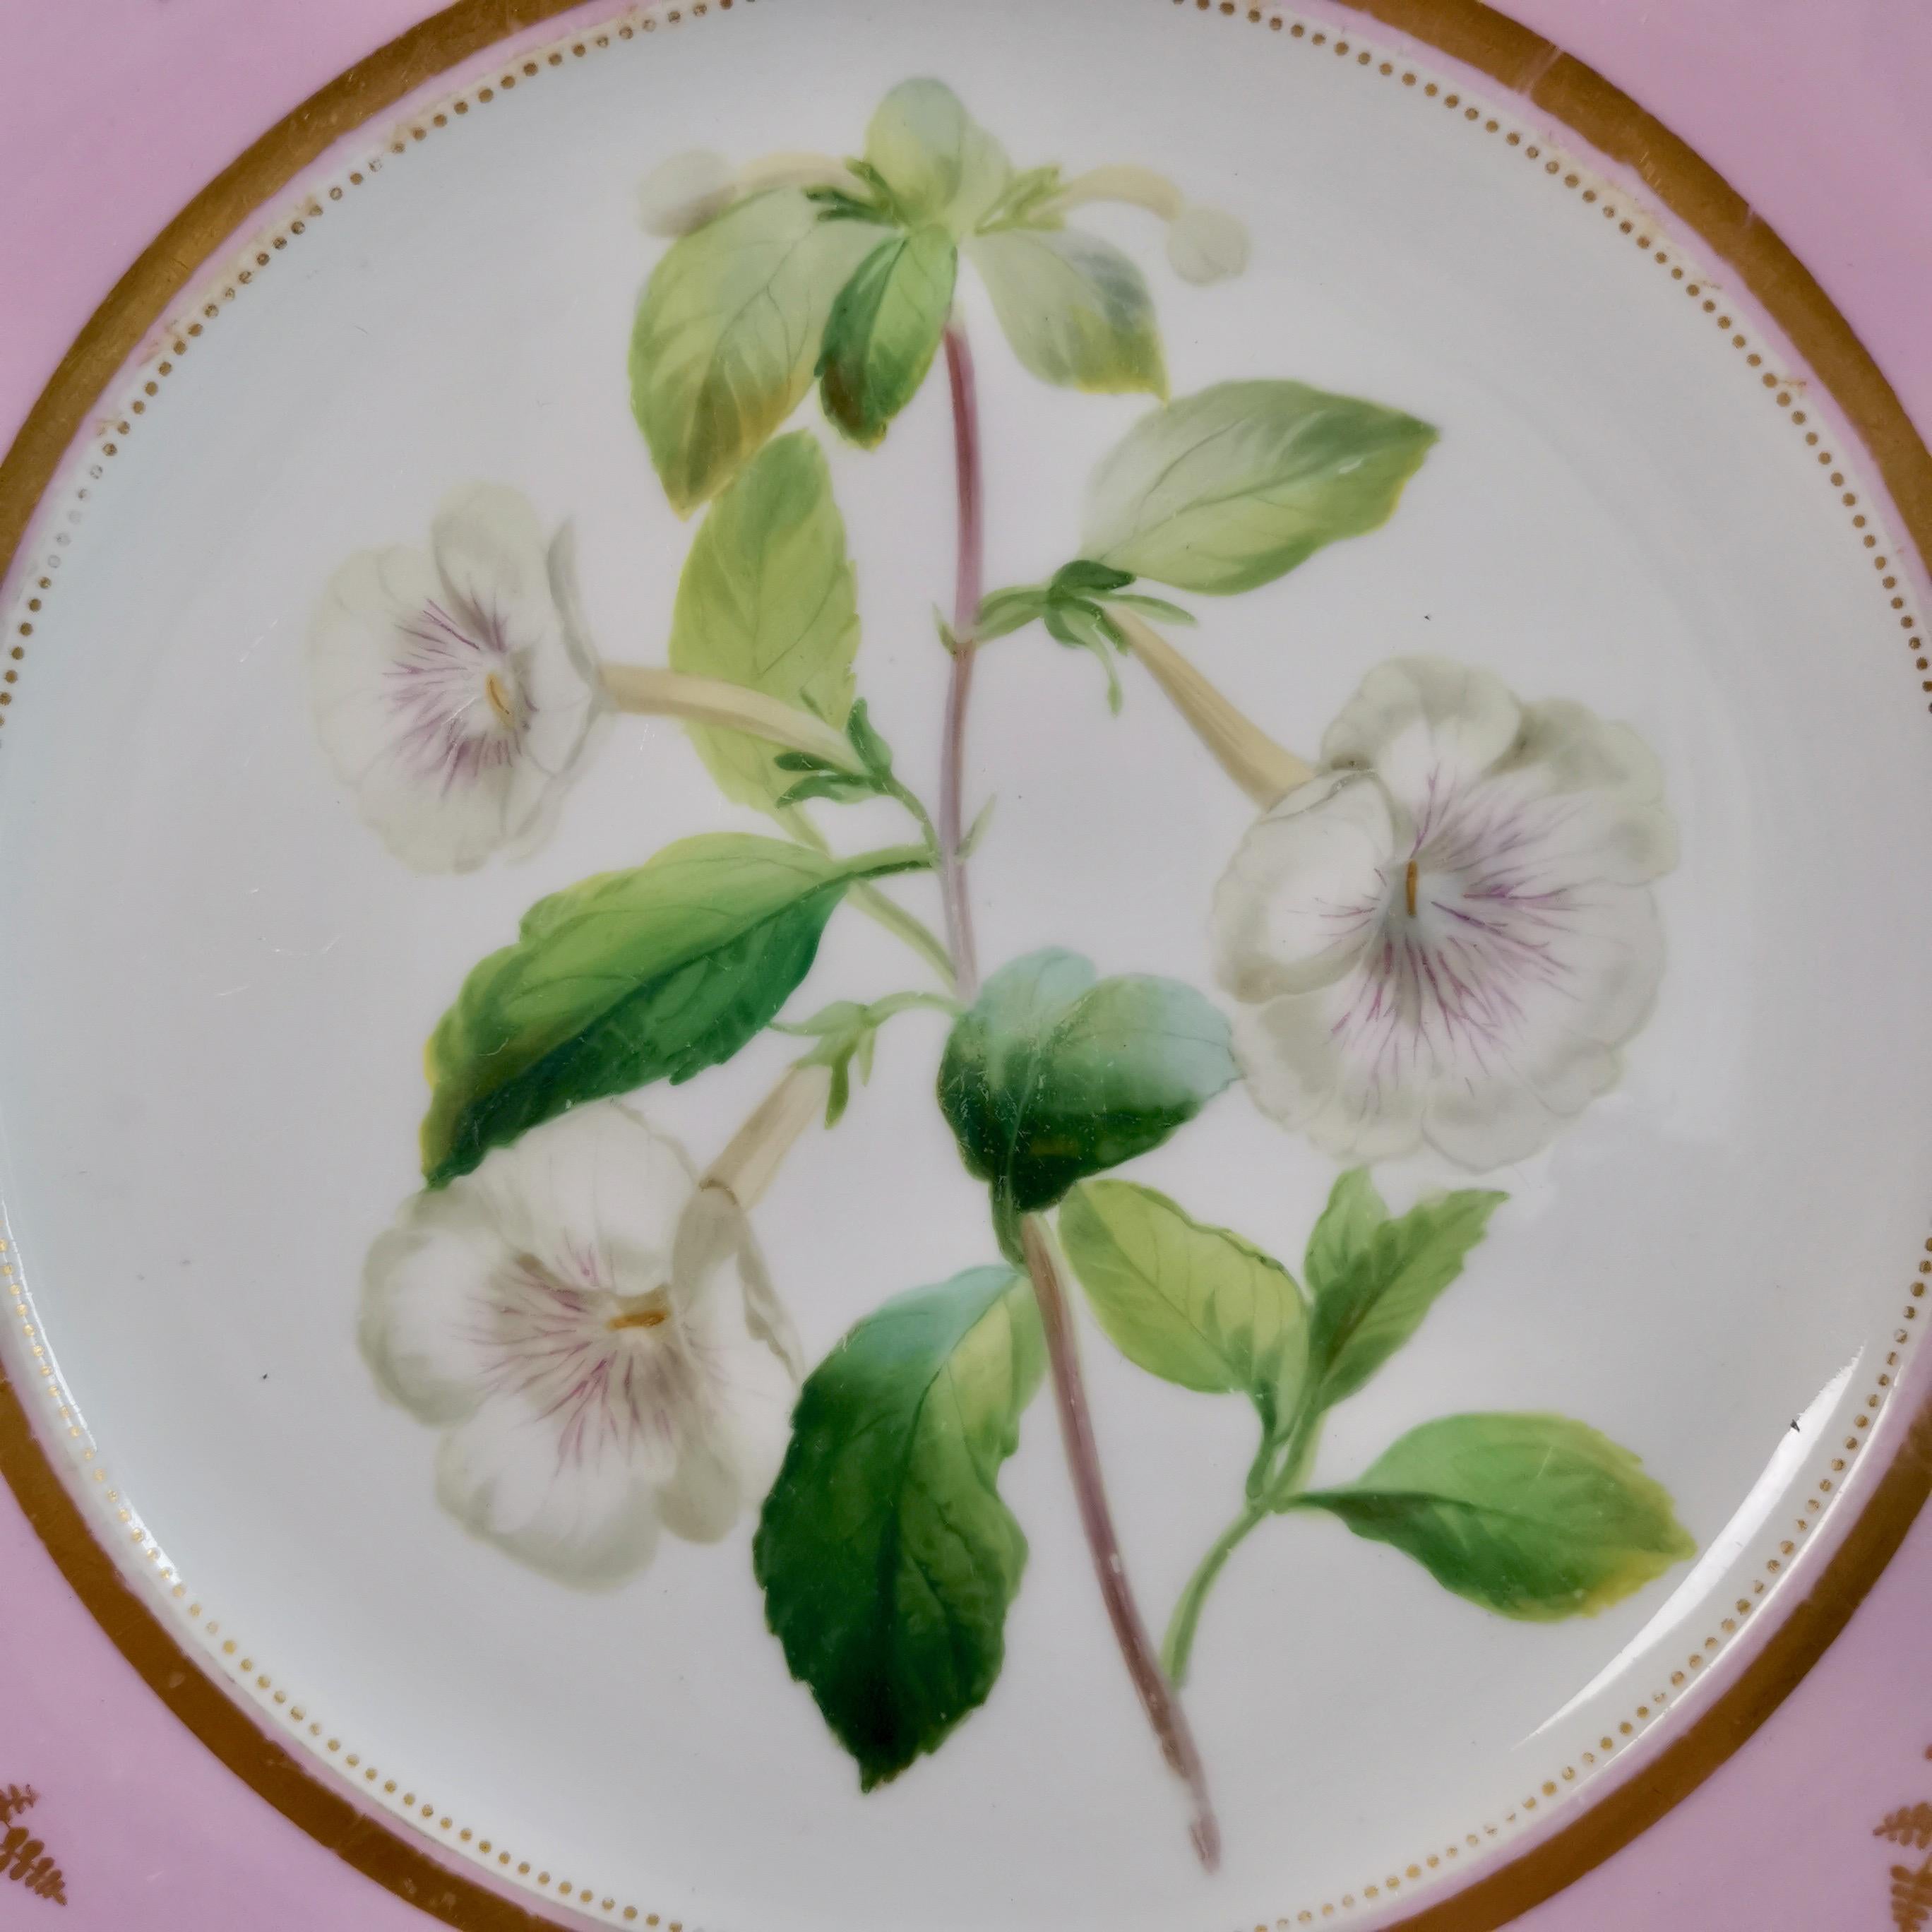 Victorian Samuel Alcock Porcelain Plate, Pink with White Achimenes, circa 1852 '1'